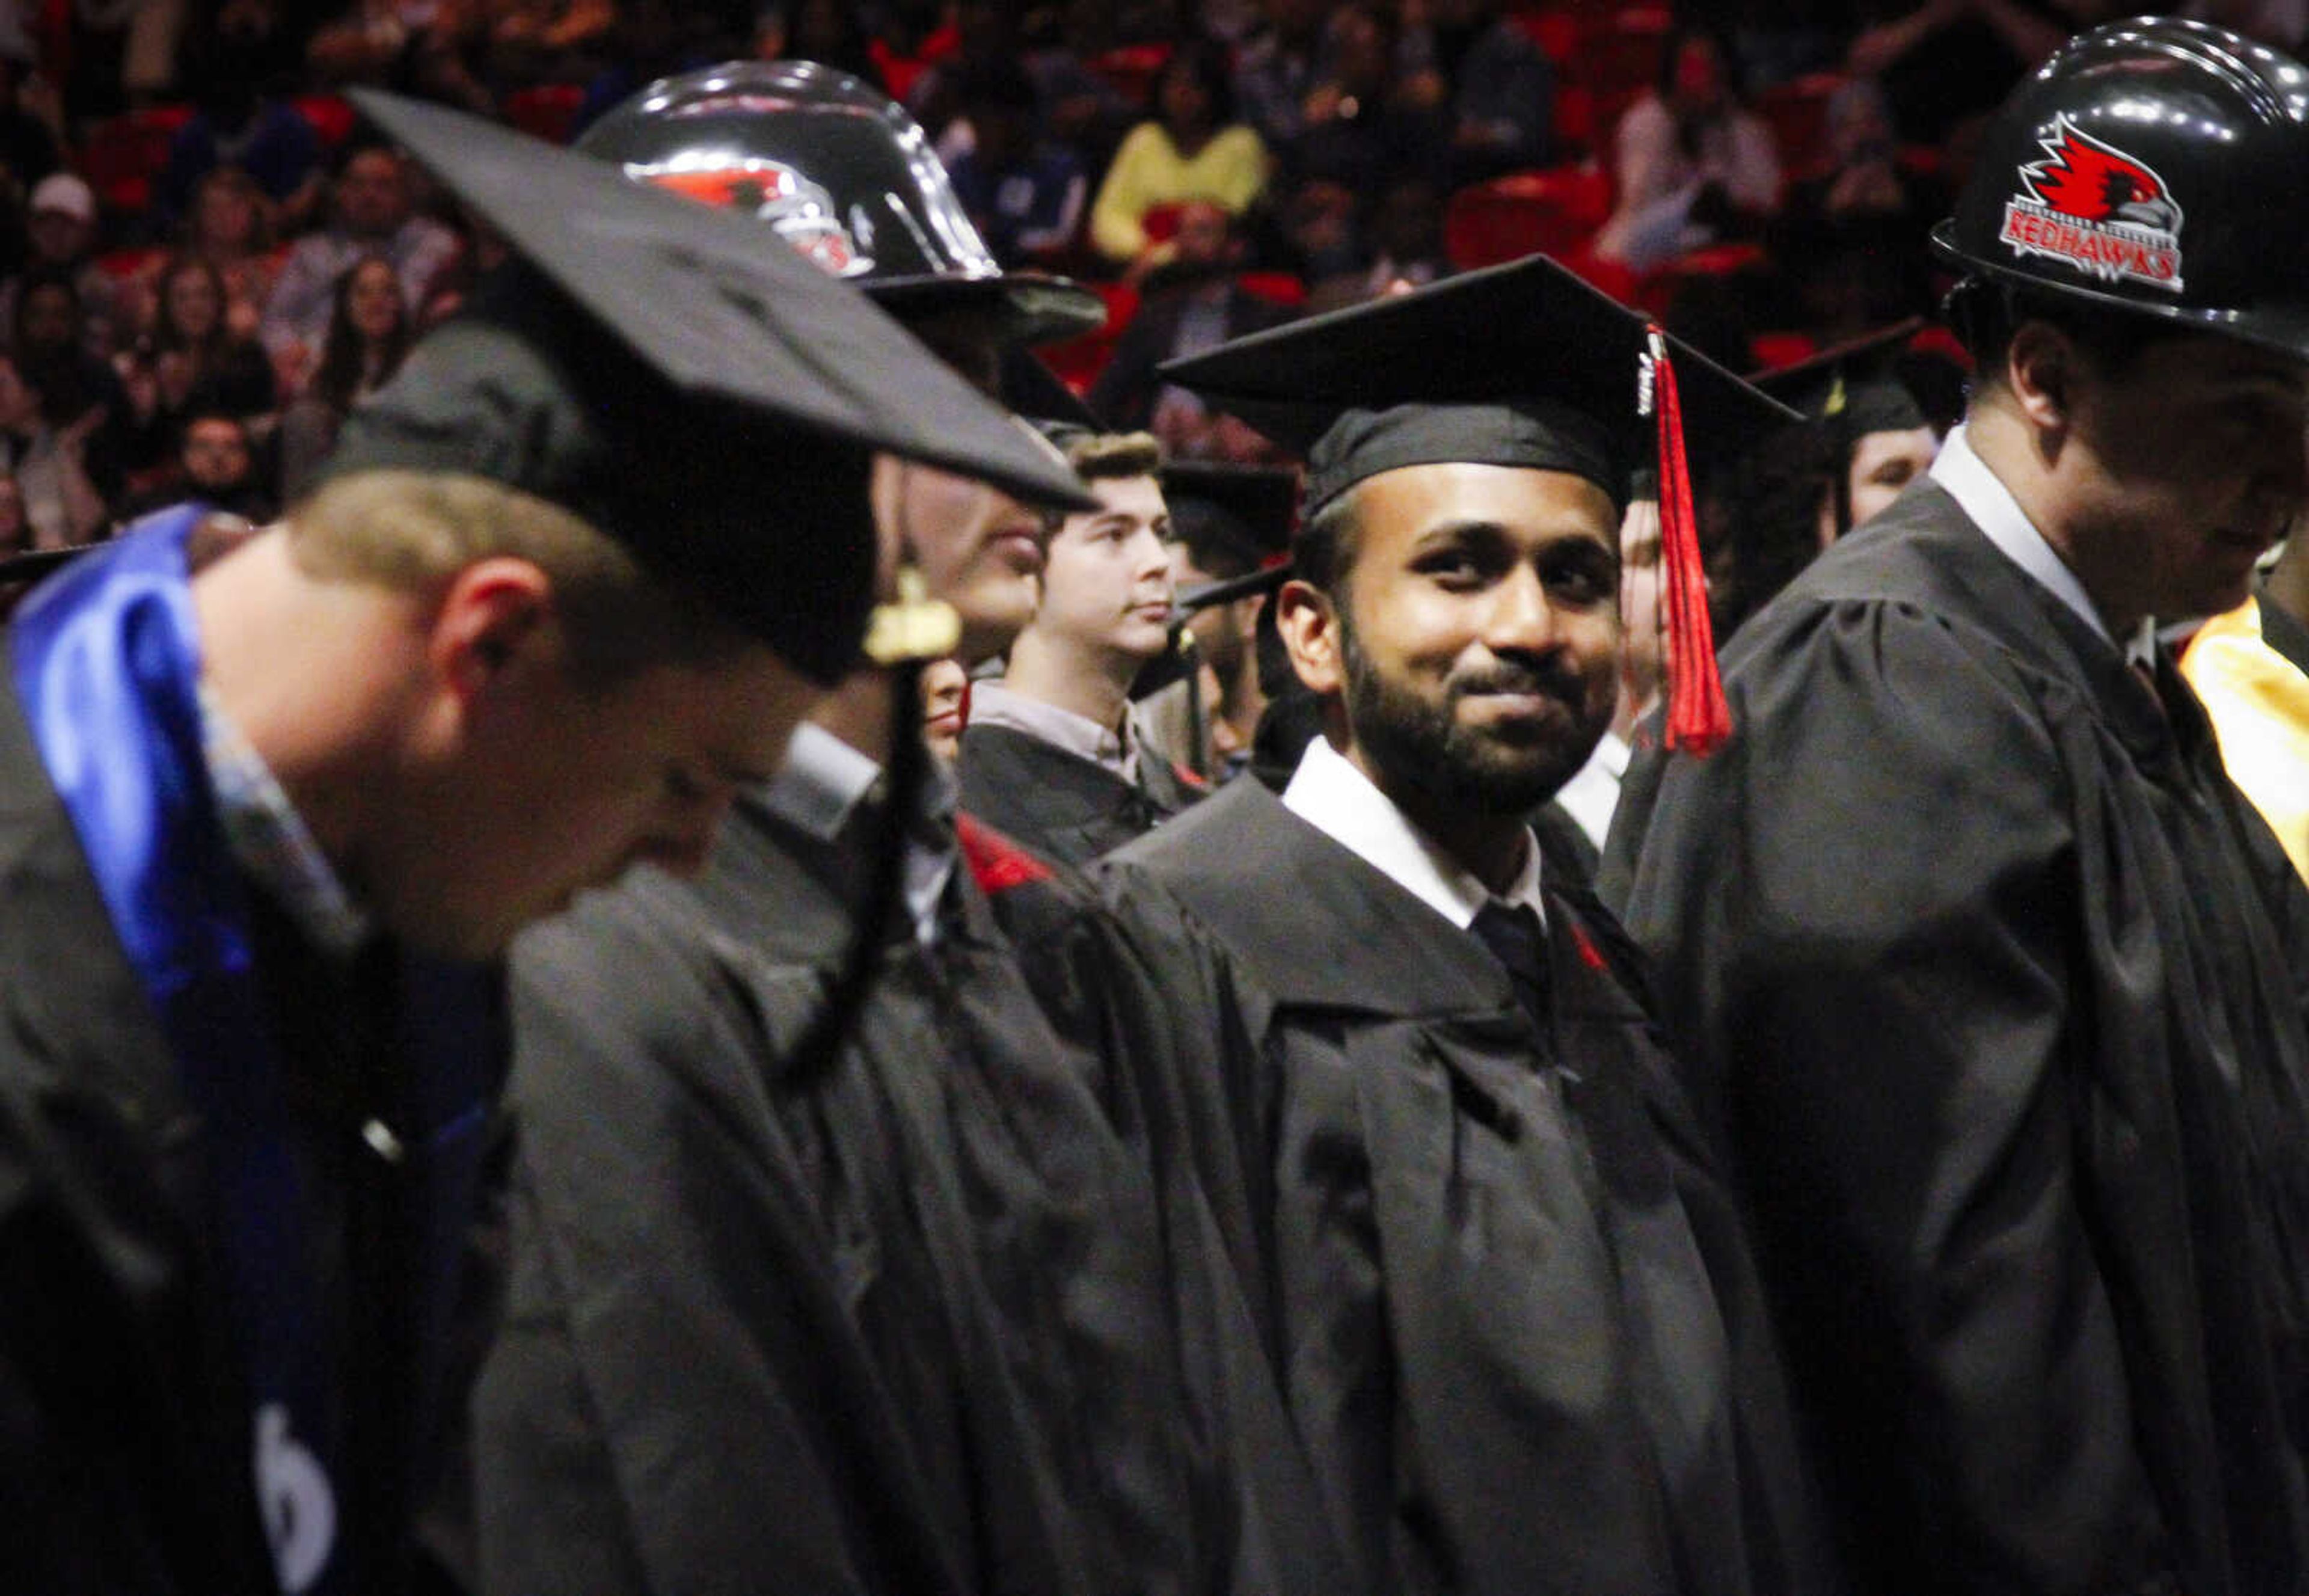 Southeast Missouri State University winter commencement ceremony on Saturday, Dec. 14, 2019, at the Show Me Center in Cape Girardeau.